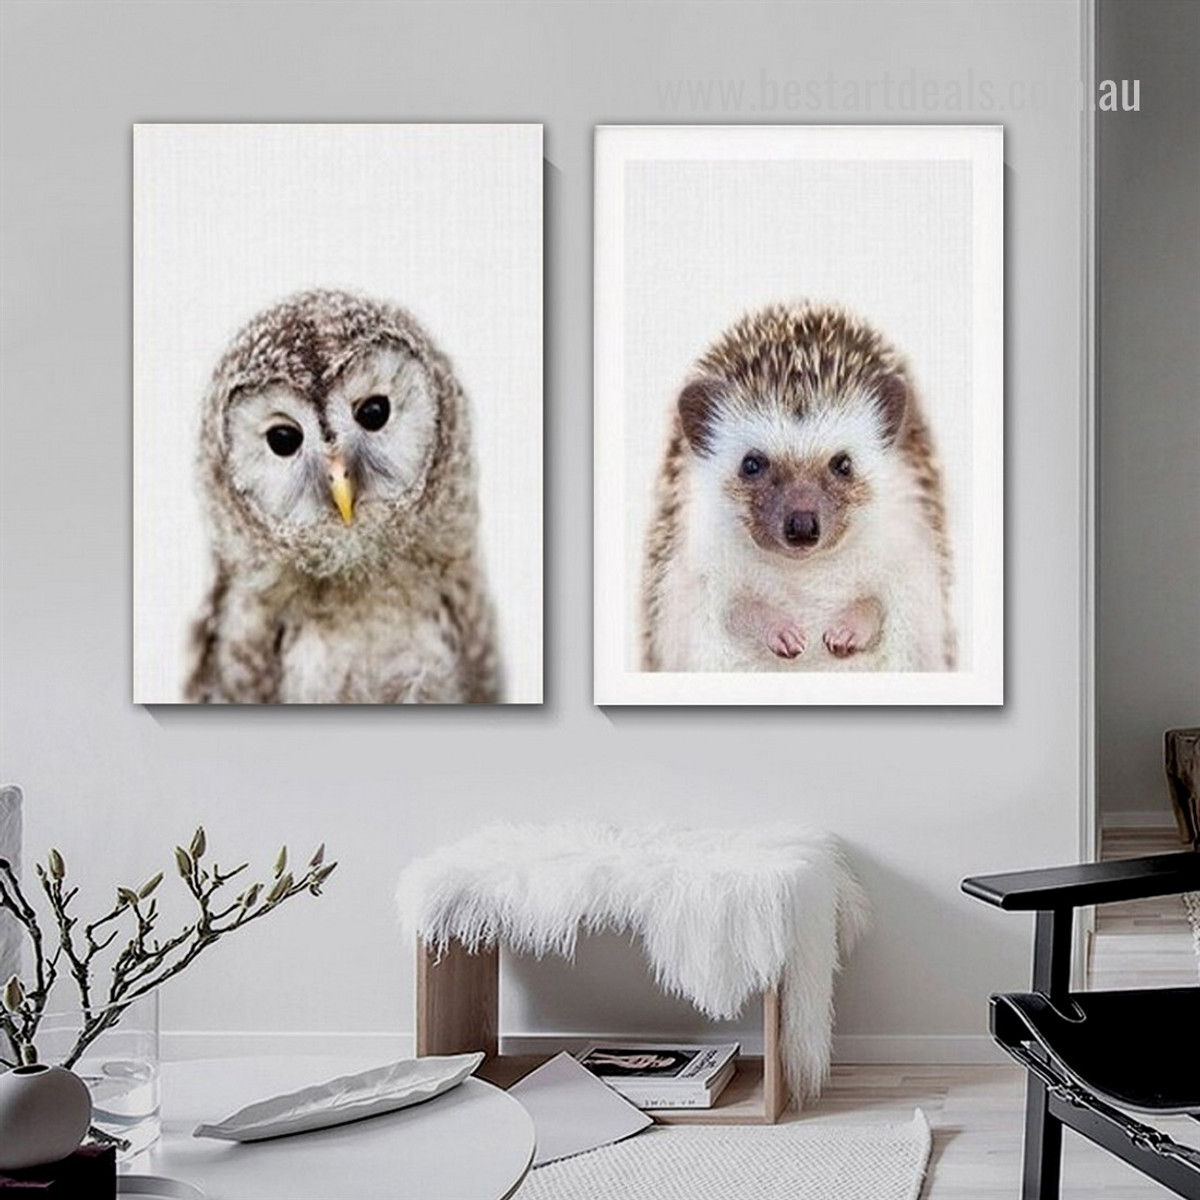 Cute Hedgehog Owl Mammal Minimalist 2 Piece Framed Stretched Animal Nordic Painting Photograph Canvas Print for Room Wall Decor